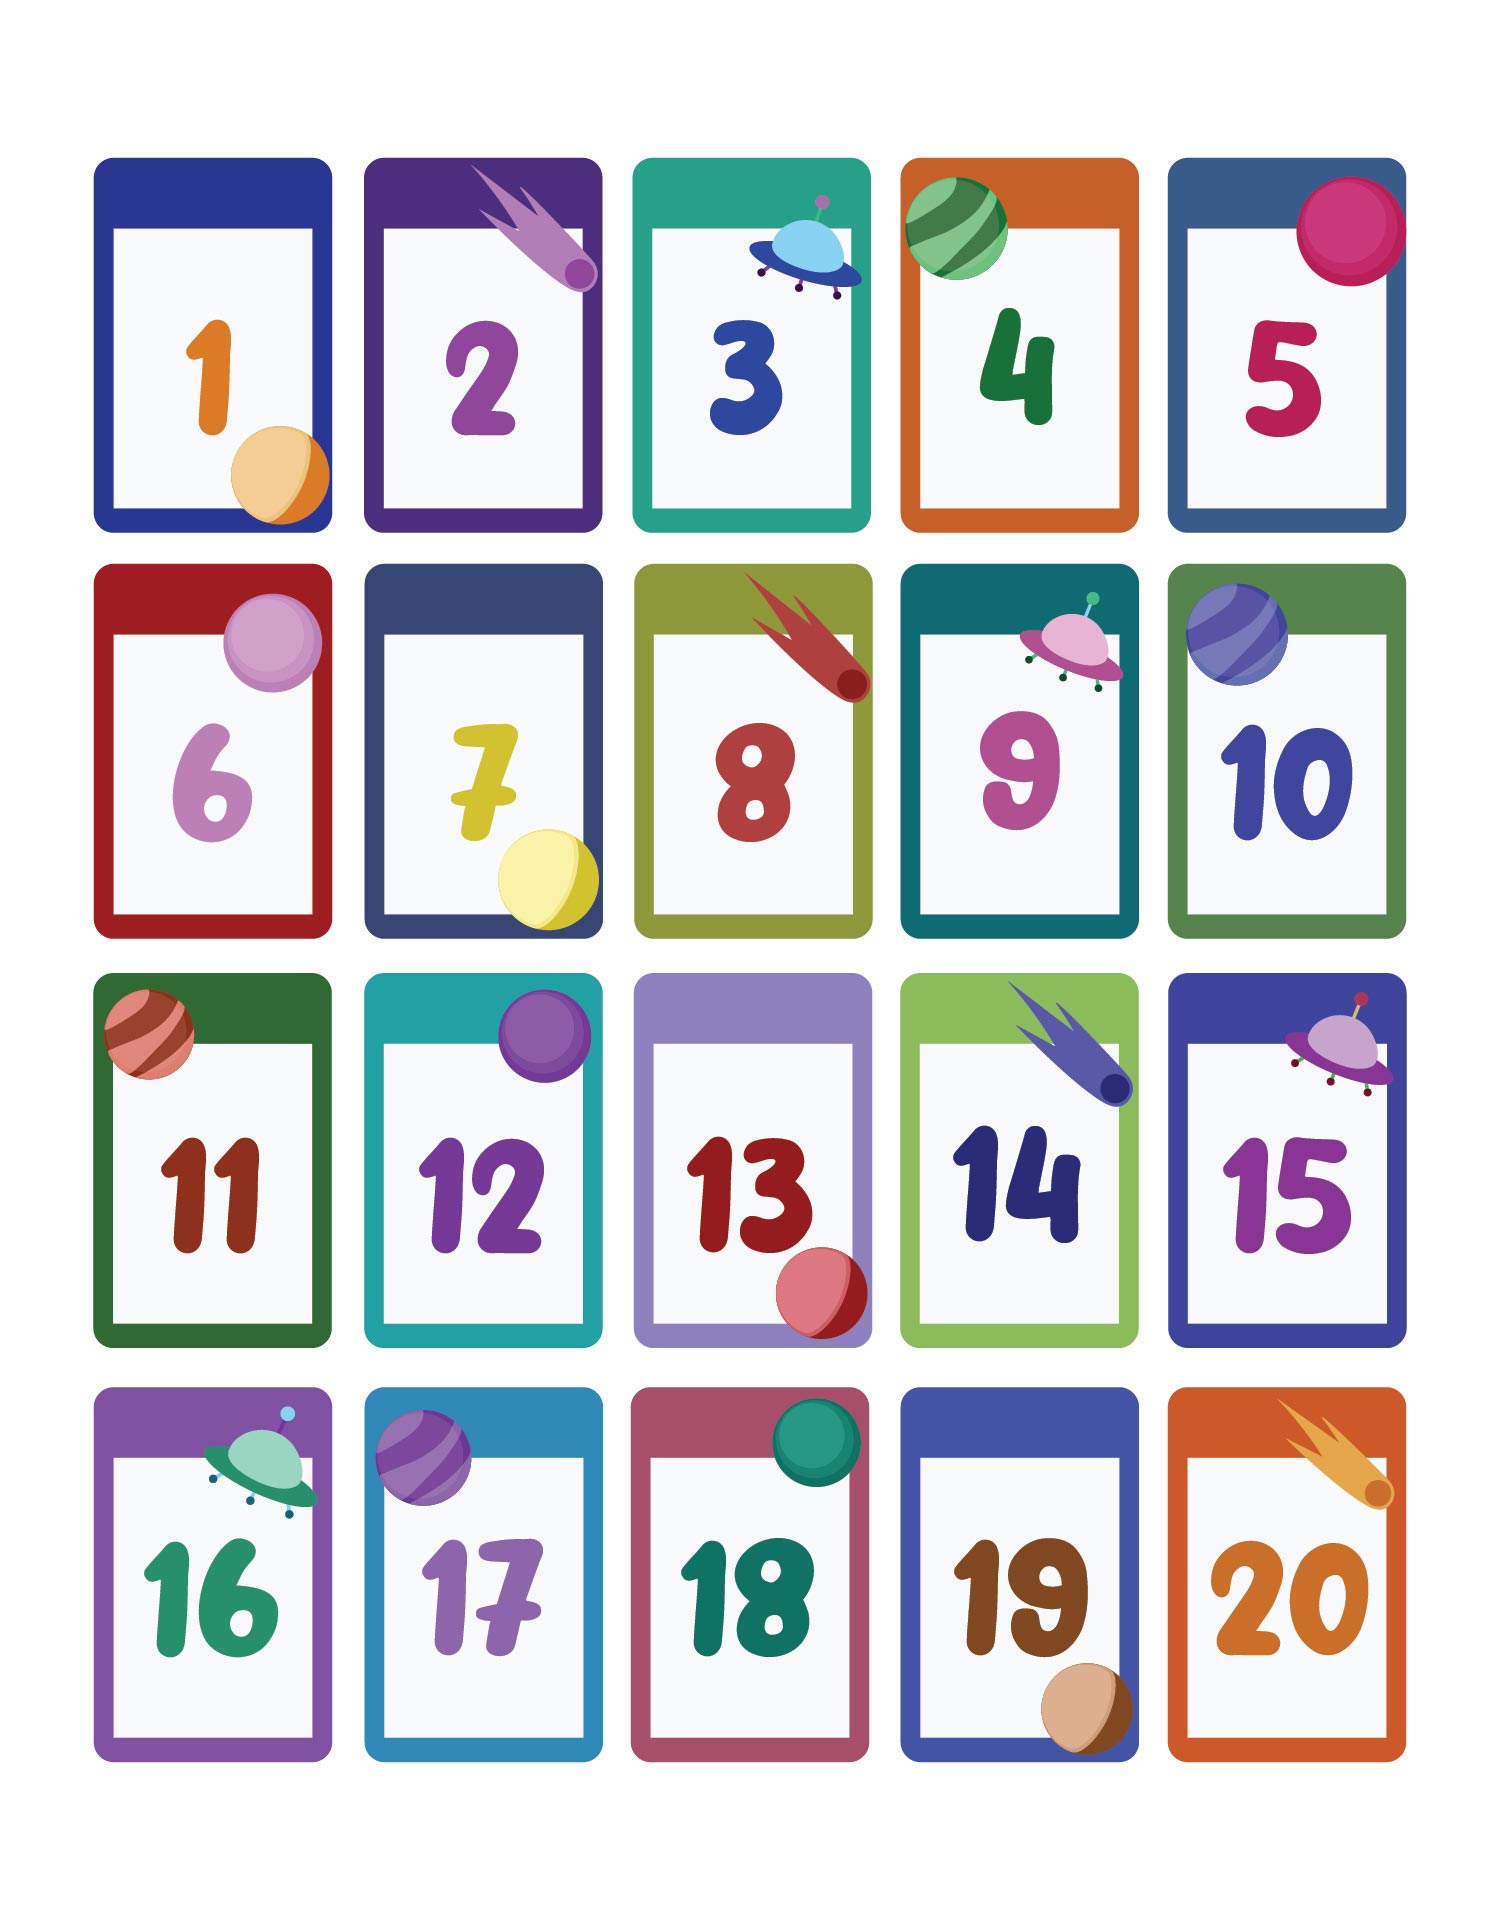 8-best-images-of-printable-number-flash-cards-1-20-free-printable-preschool-number-flash-cards